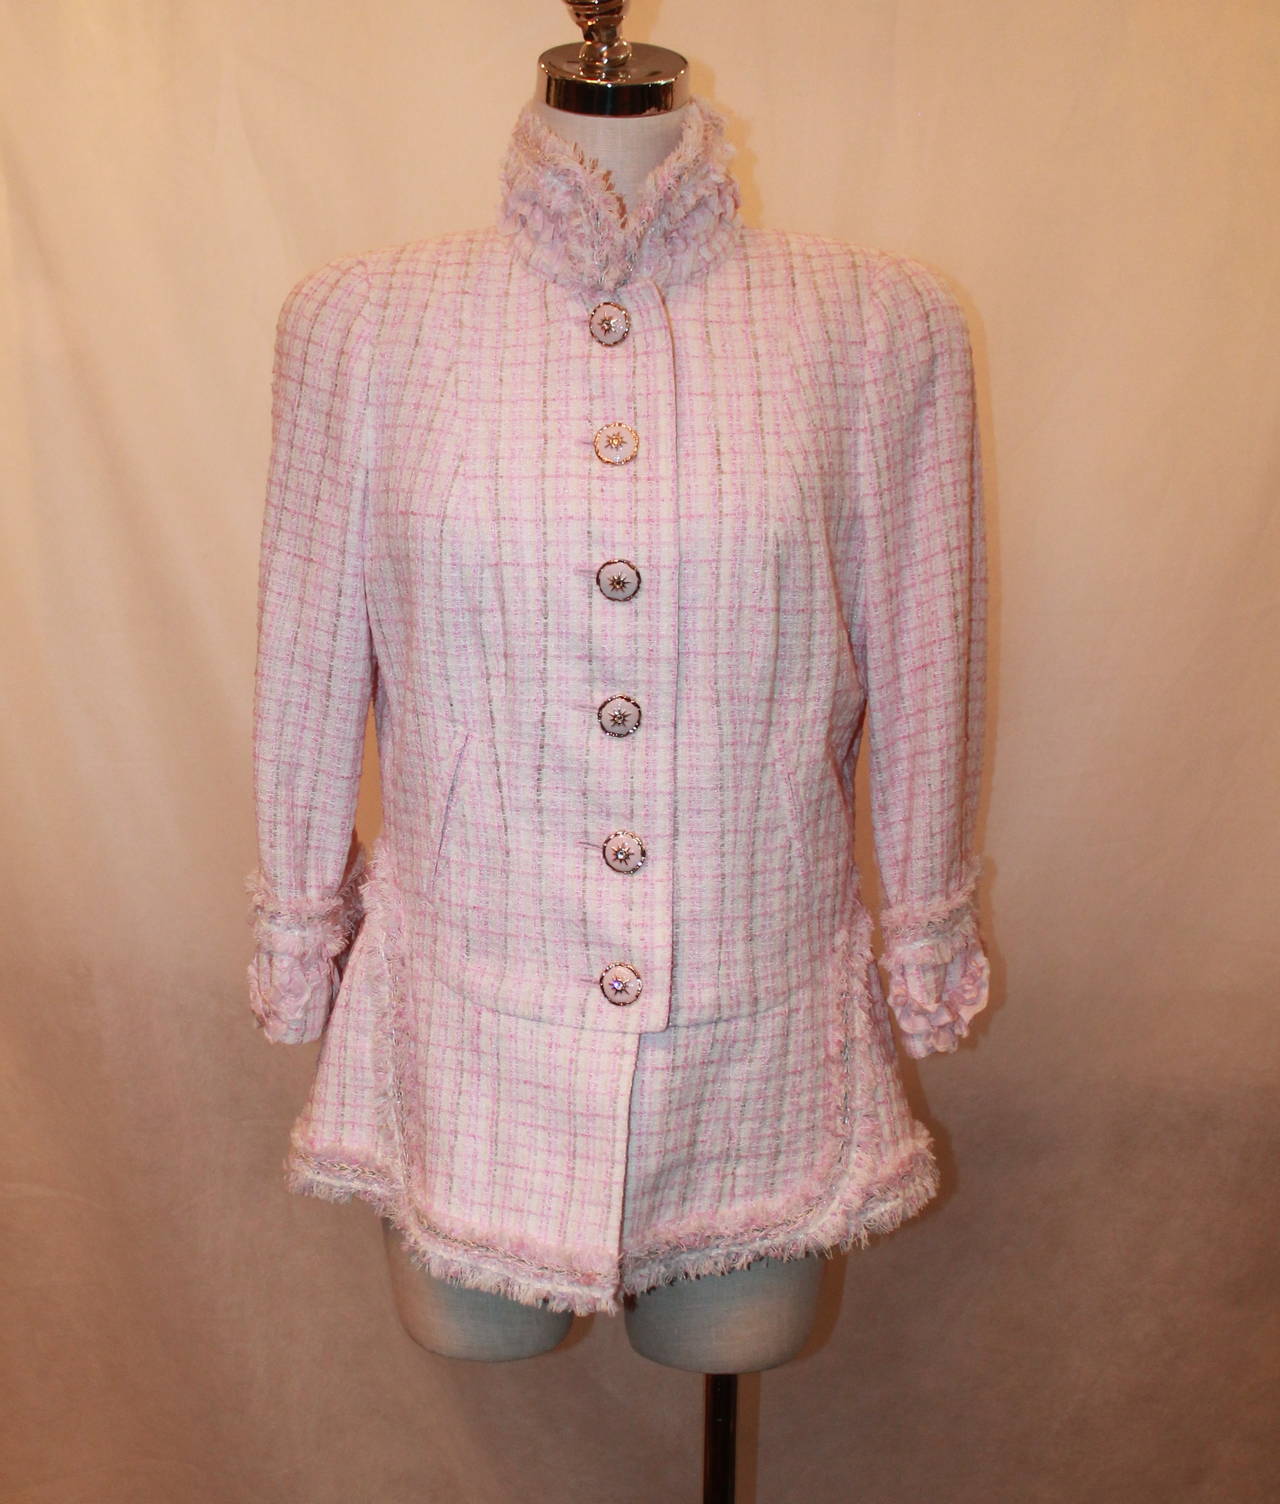 Chanel 2013 Light Pink & White Tweed Jacket with Fringe Detail - 44 - NWT. This jacket is in excellent condition and has a slight peplum. The fabric is a nylon and wool blend with 6 pink enamel & rhinestone buttons. The fringe trim is along the